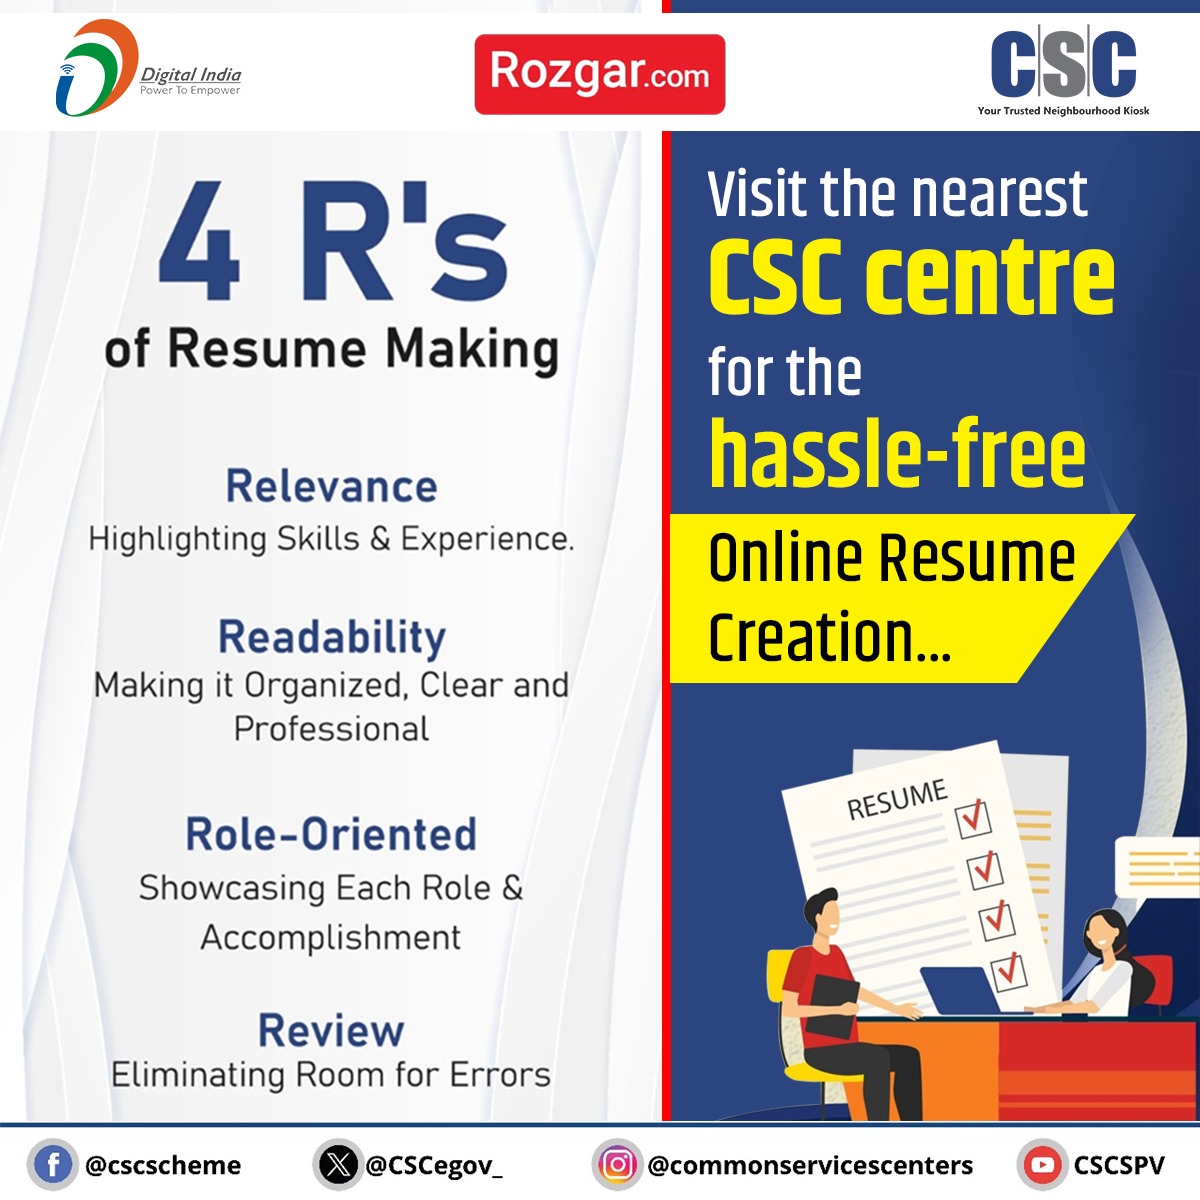 4 Key R's of Resume Making... 1. Relevance 2. Readability 3. Role-Oriented 4. Review Visit the nearest #CSC centre for the hassle-free Online #Resume Creation... For details, visit the Digital Seva Portal. For any queries, call us on 14599 or write us on skills@csc.gov.in